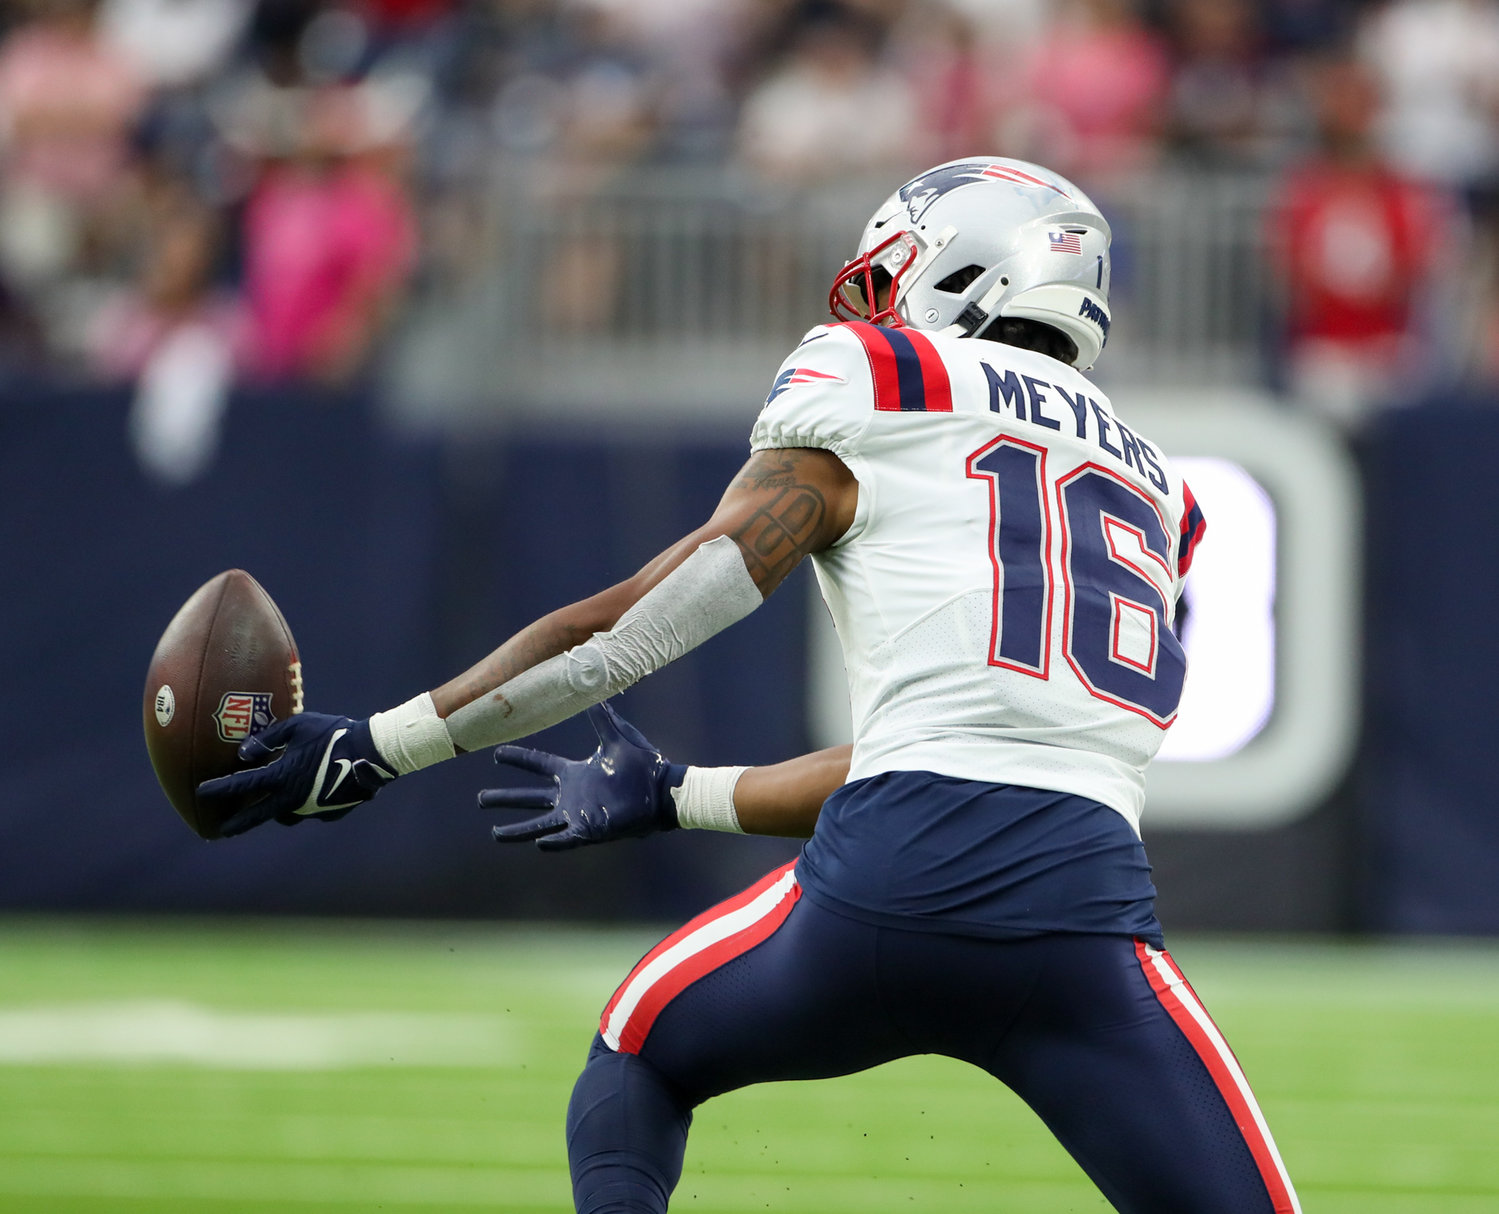 New England Patriots wide receiver Jakobi Meyers (16) drops a pass during an NFL game between Houston and New England on October 10, 2021 in Houston, Texas. The Patriots won 25-22.